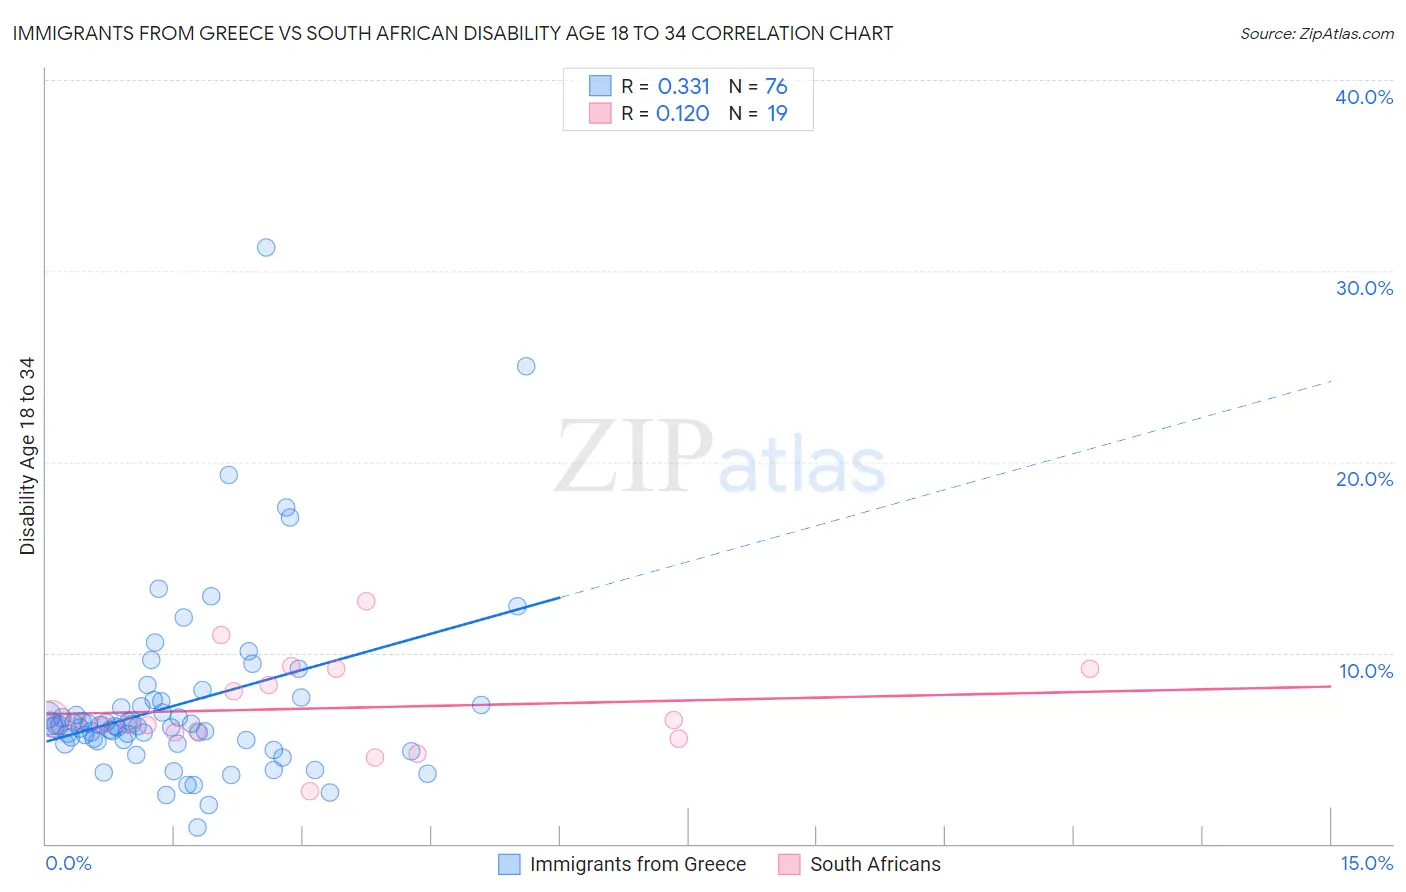 Immigrants from Greece vs South African Disability Age 18 to 34